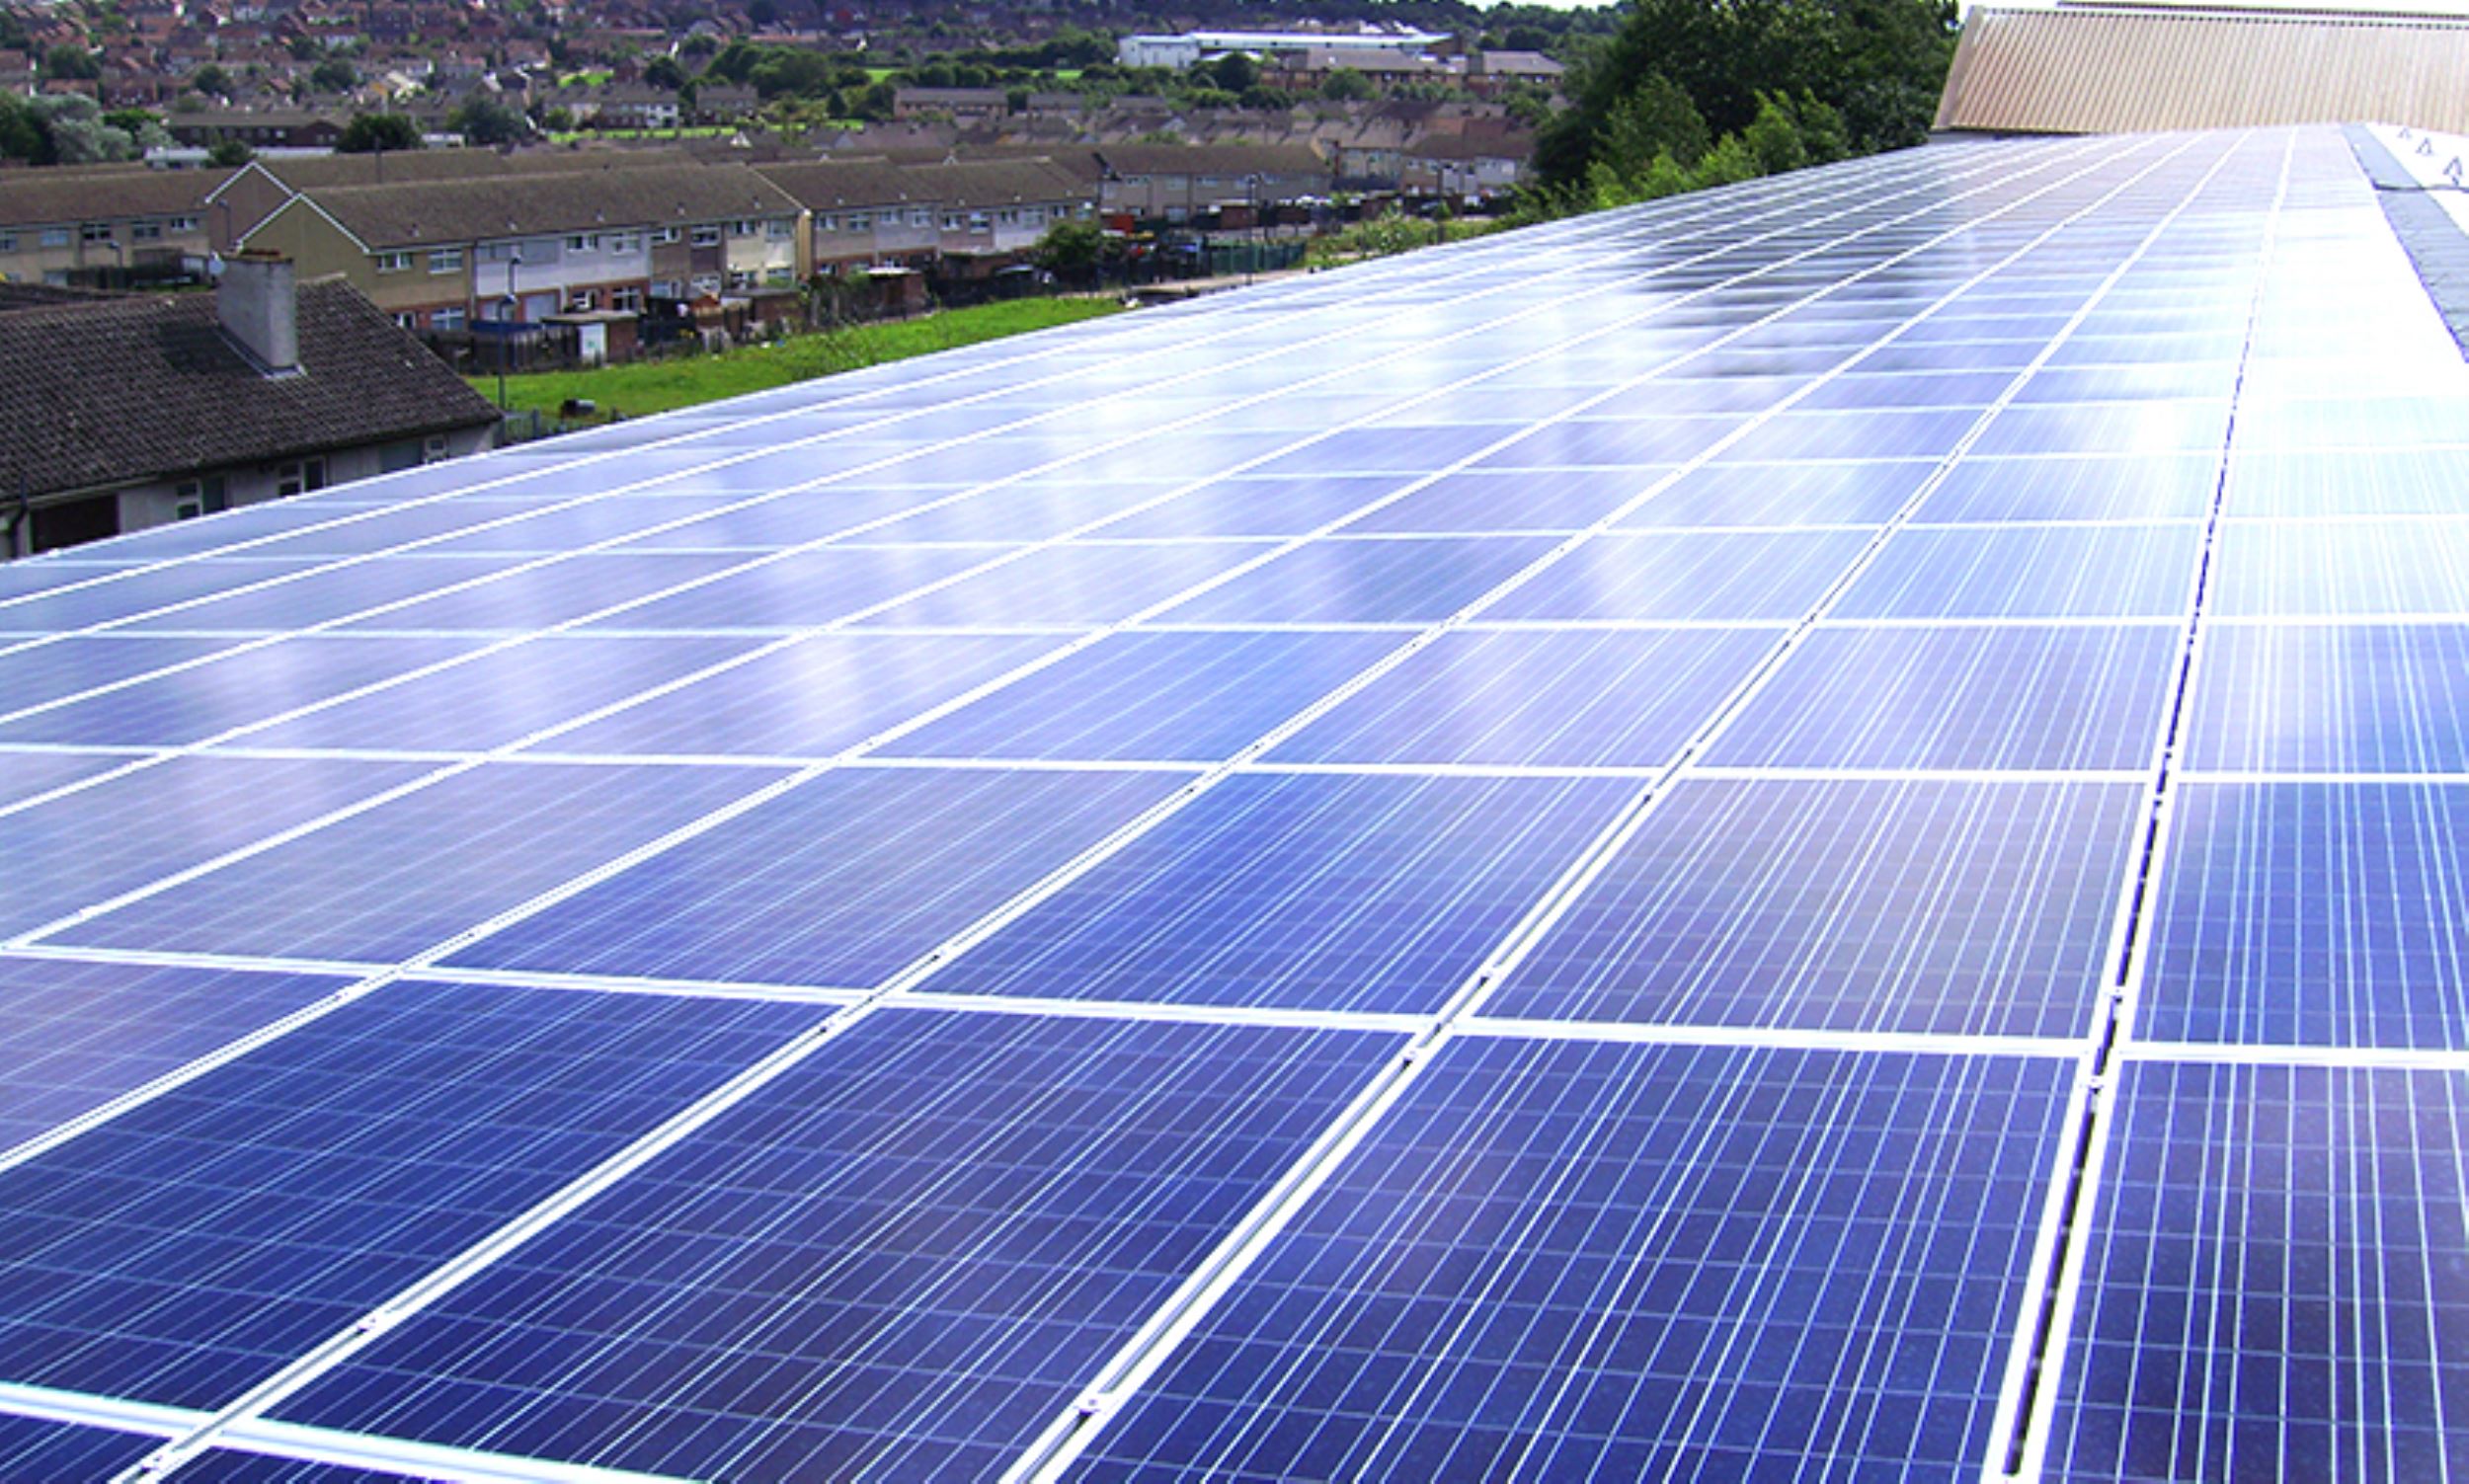 Barrett Steel leads the way in renewable energy with £400,000 solar project